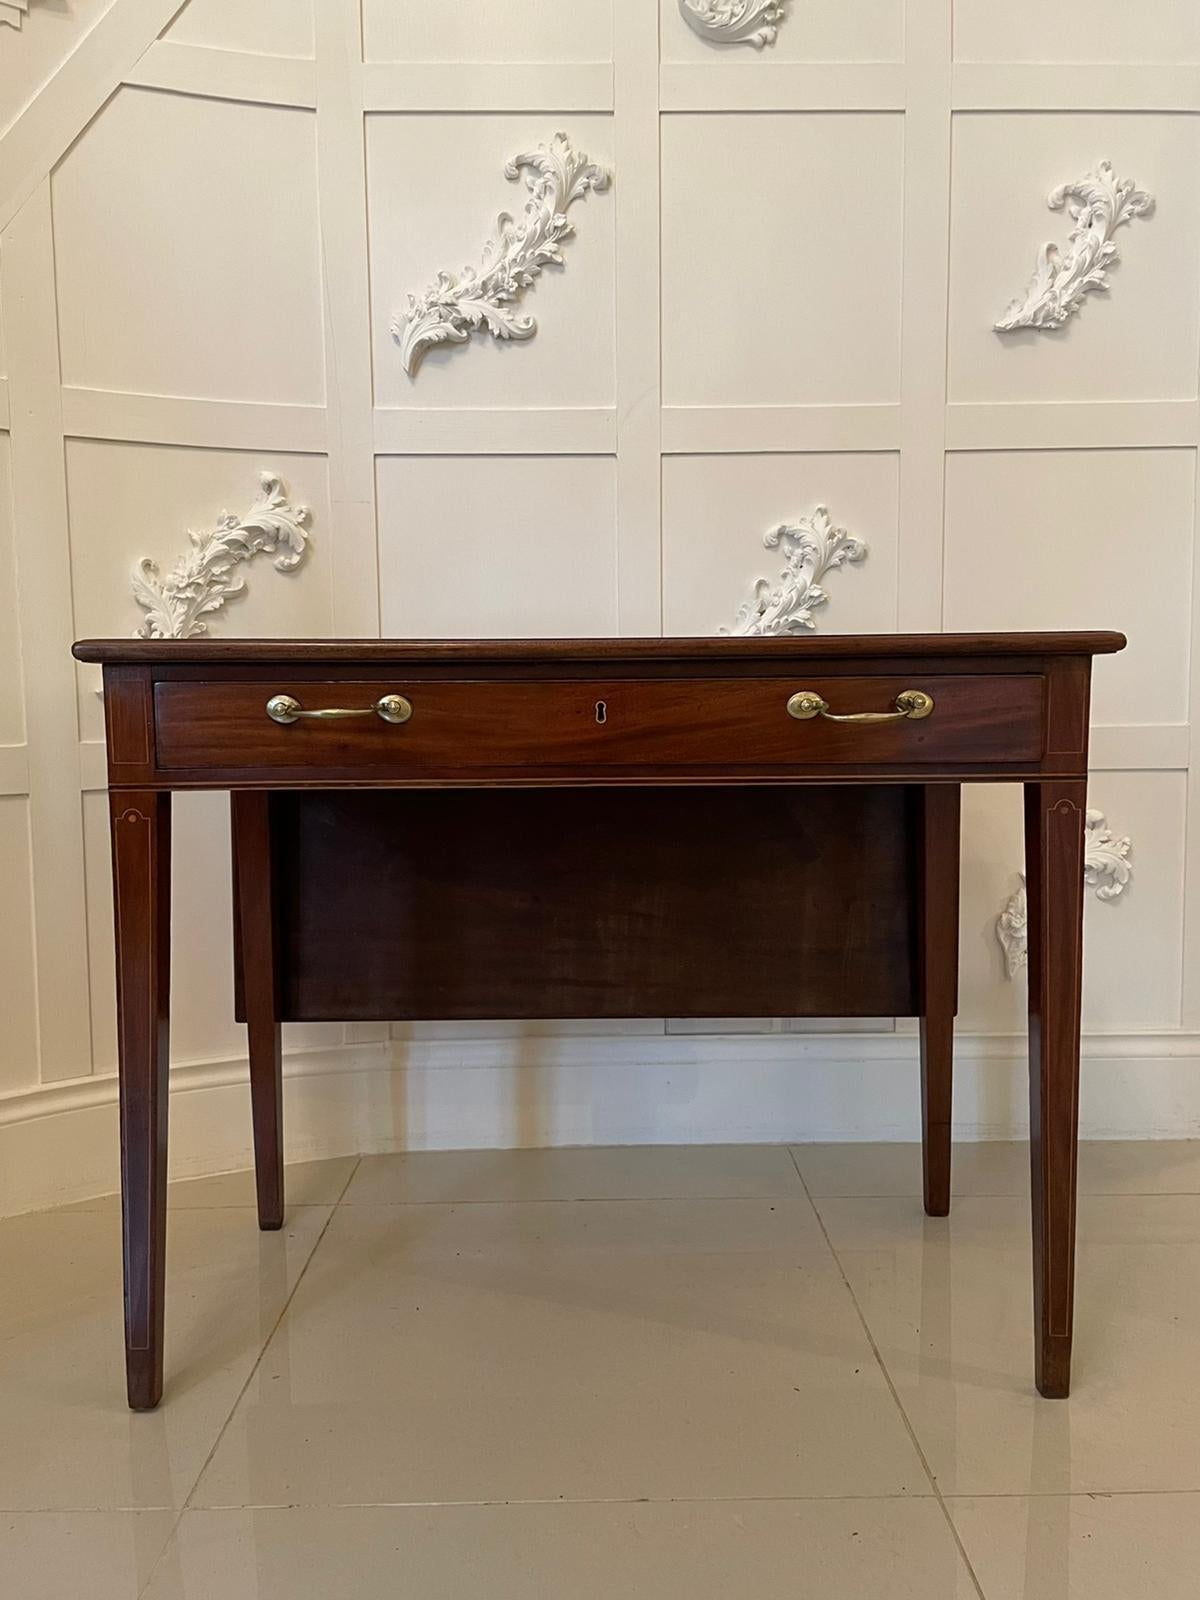 Antique 19th century George III inlaid mahogany drop leaf side table having a marvelous mahogany top with a drop leaf, one long drawer with pretty inlay and original brass handles. It stands on two inlaid square tapering legs to the front and two